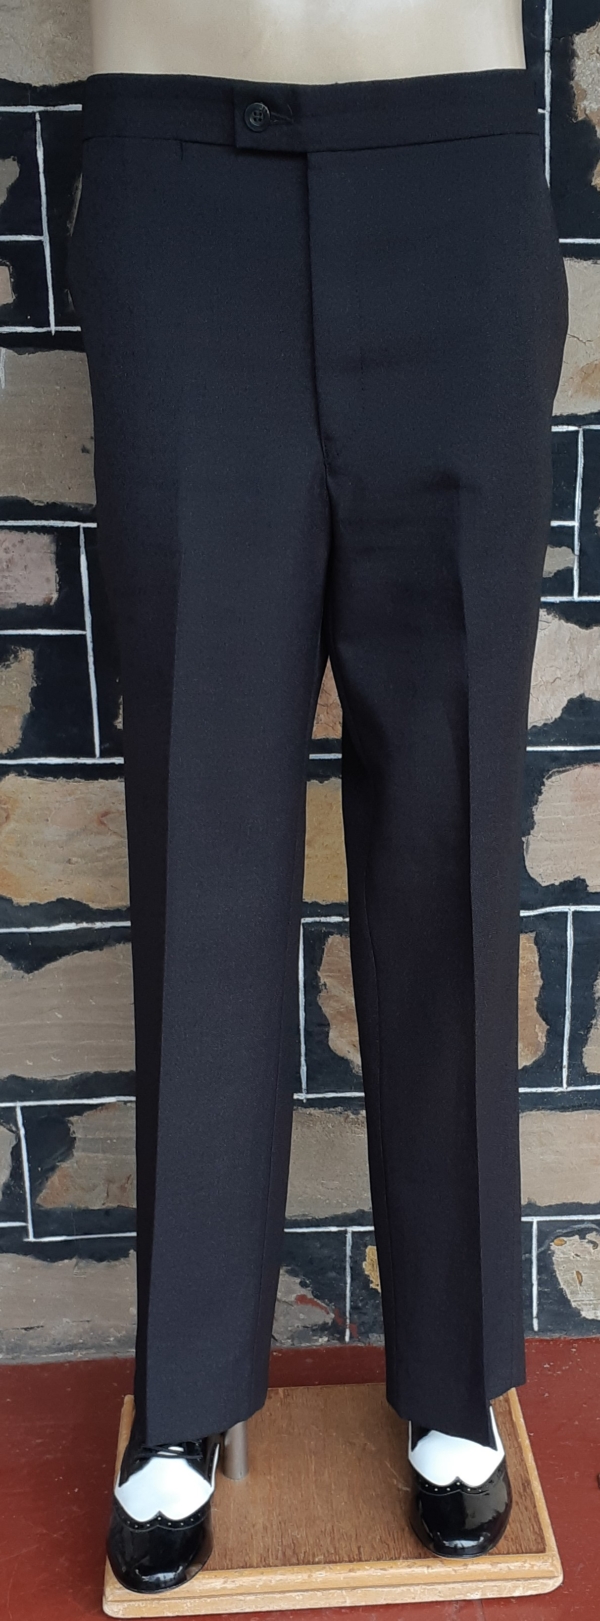 1960's, Flat front Pant, Textured Polyester, Charcoal, by 'Mr. Riggs', size L